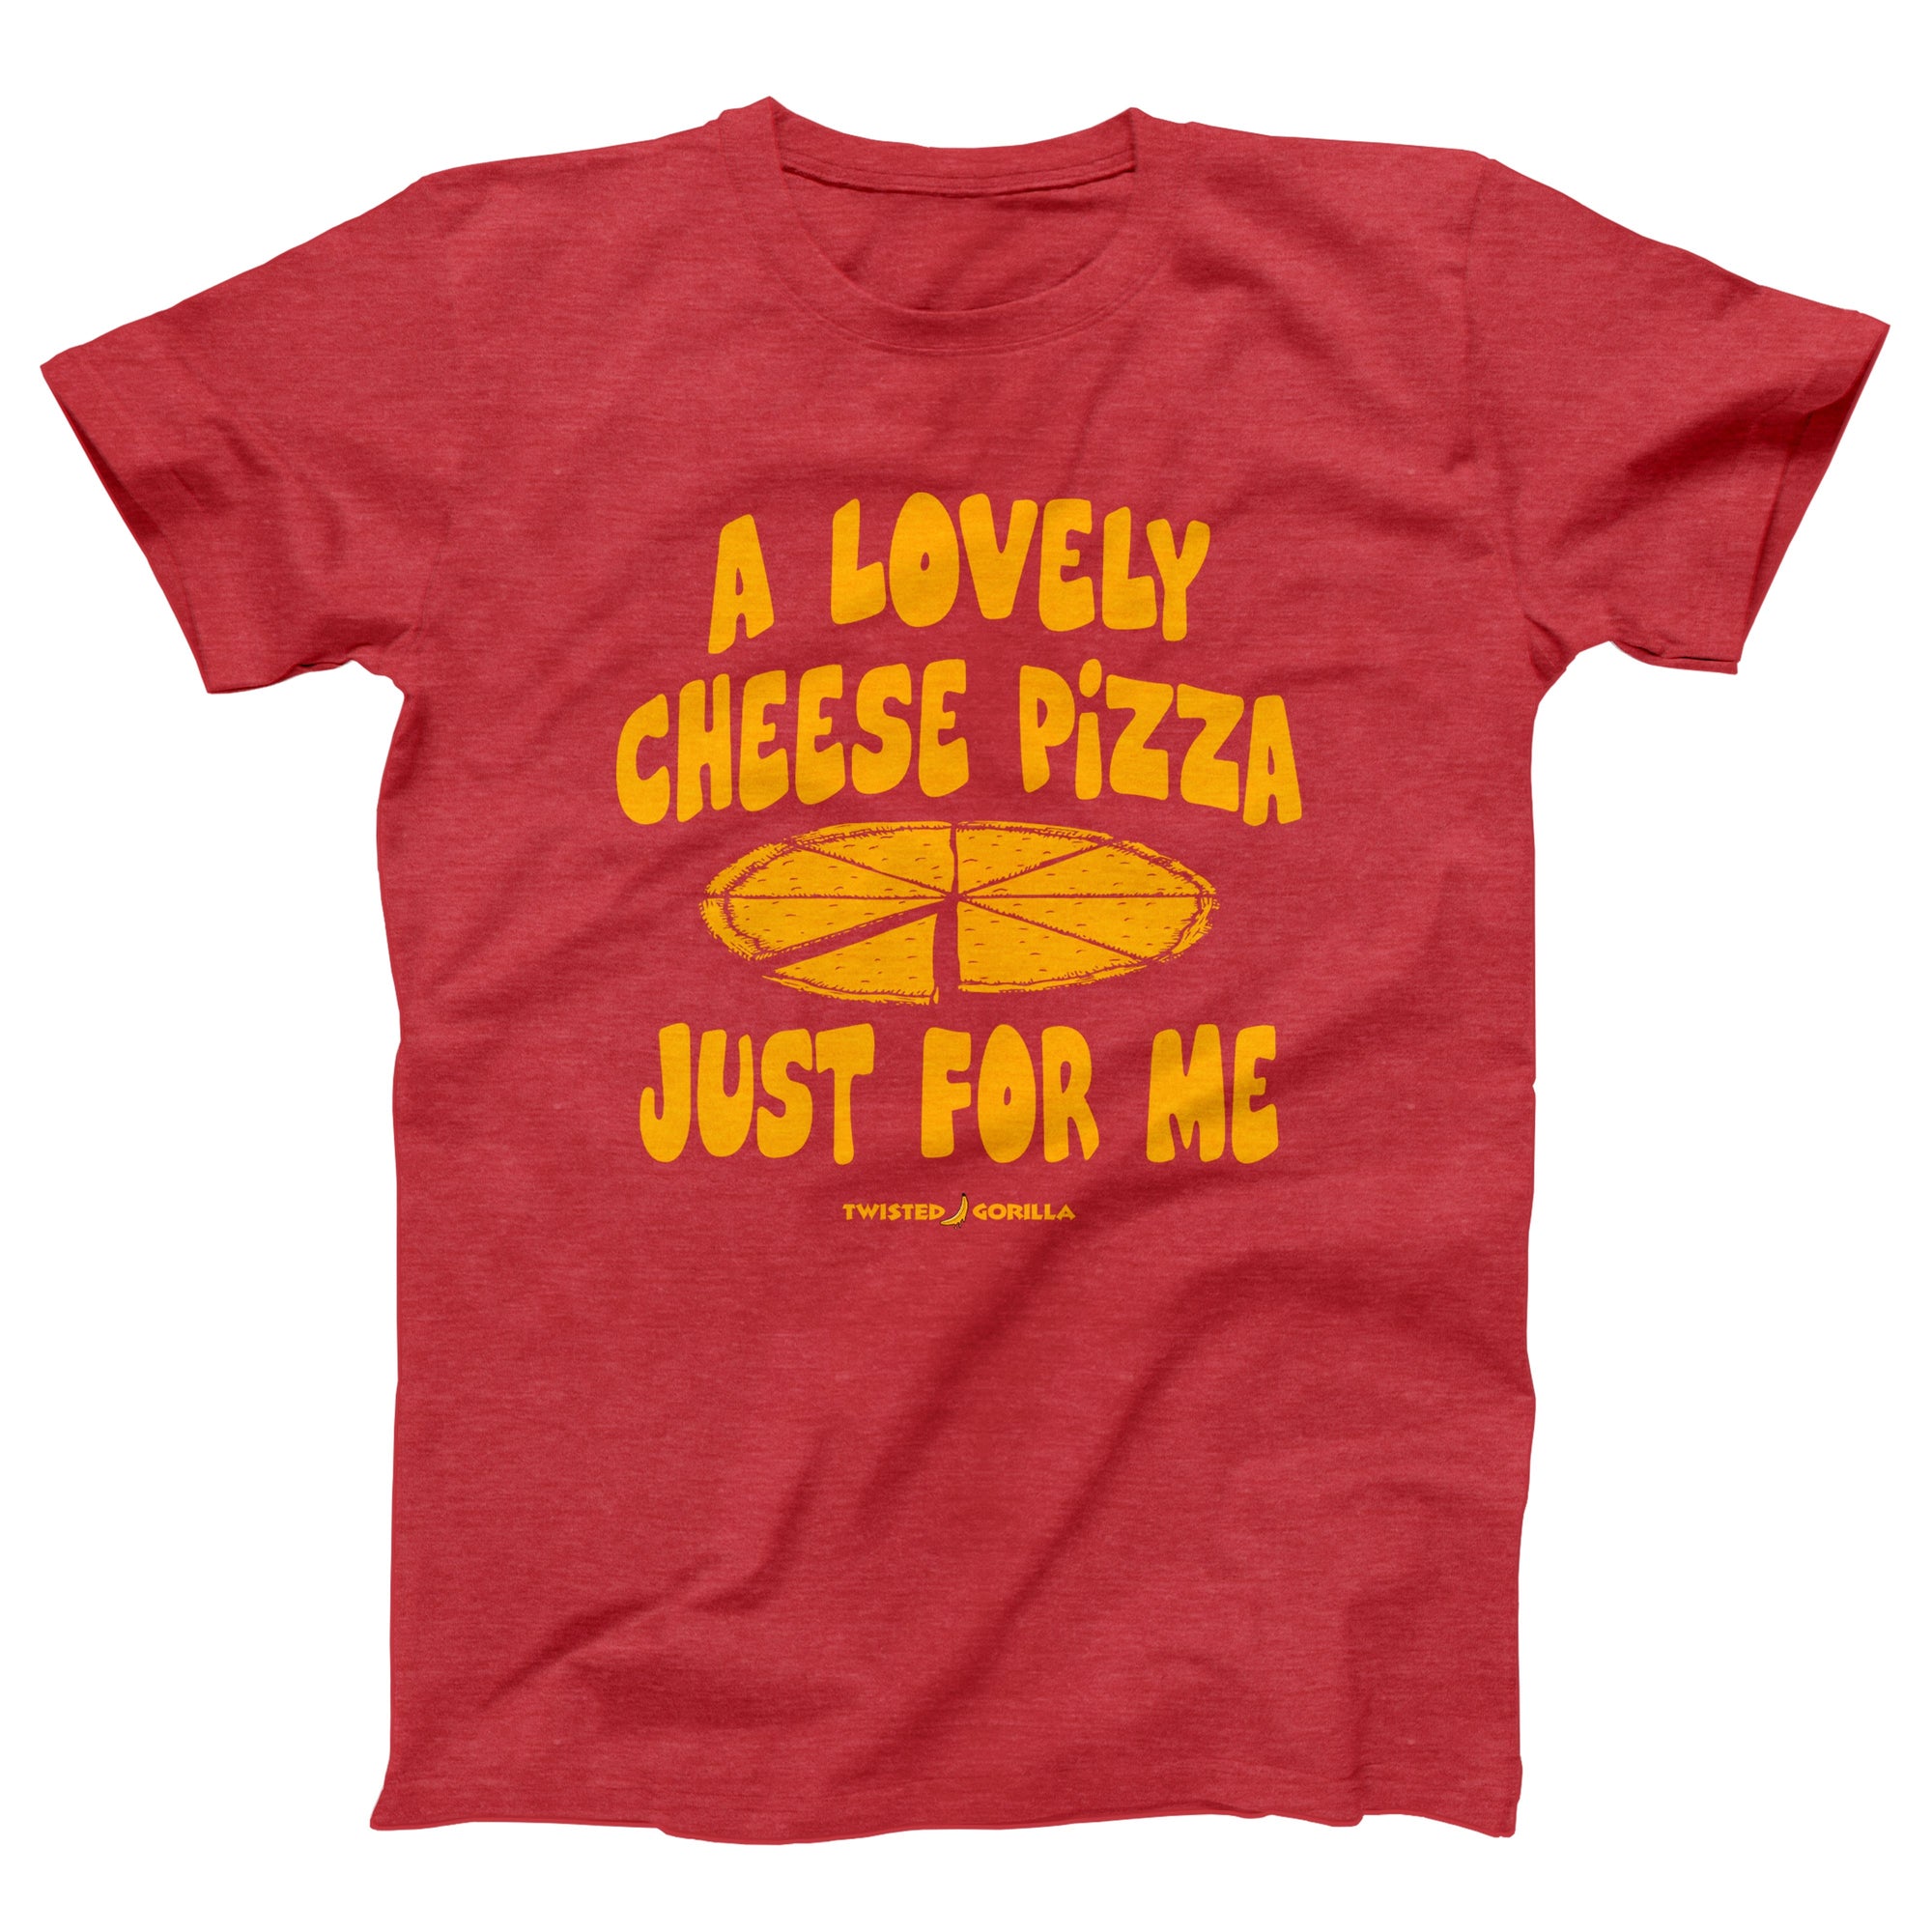 Cheese Pizza Just For Me Adult Unisex T-Shirt - marionmartigny